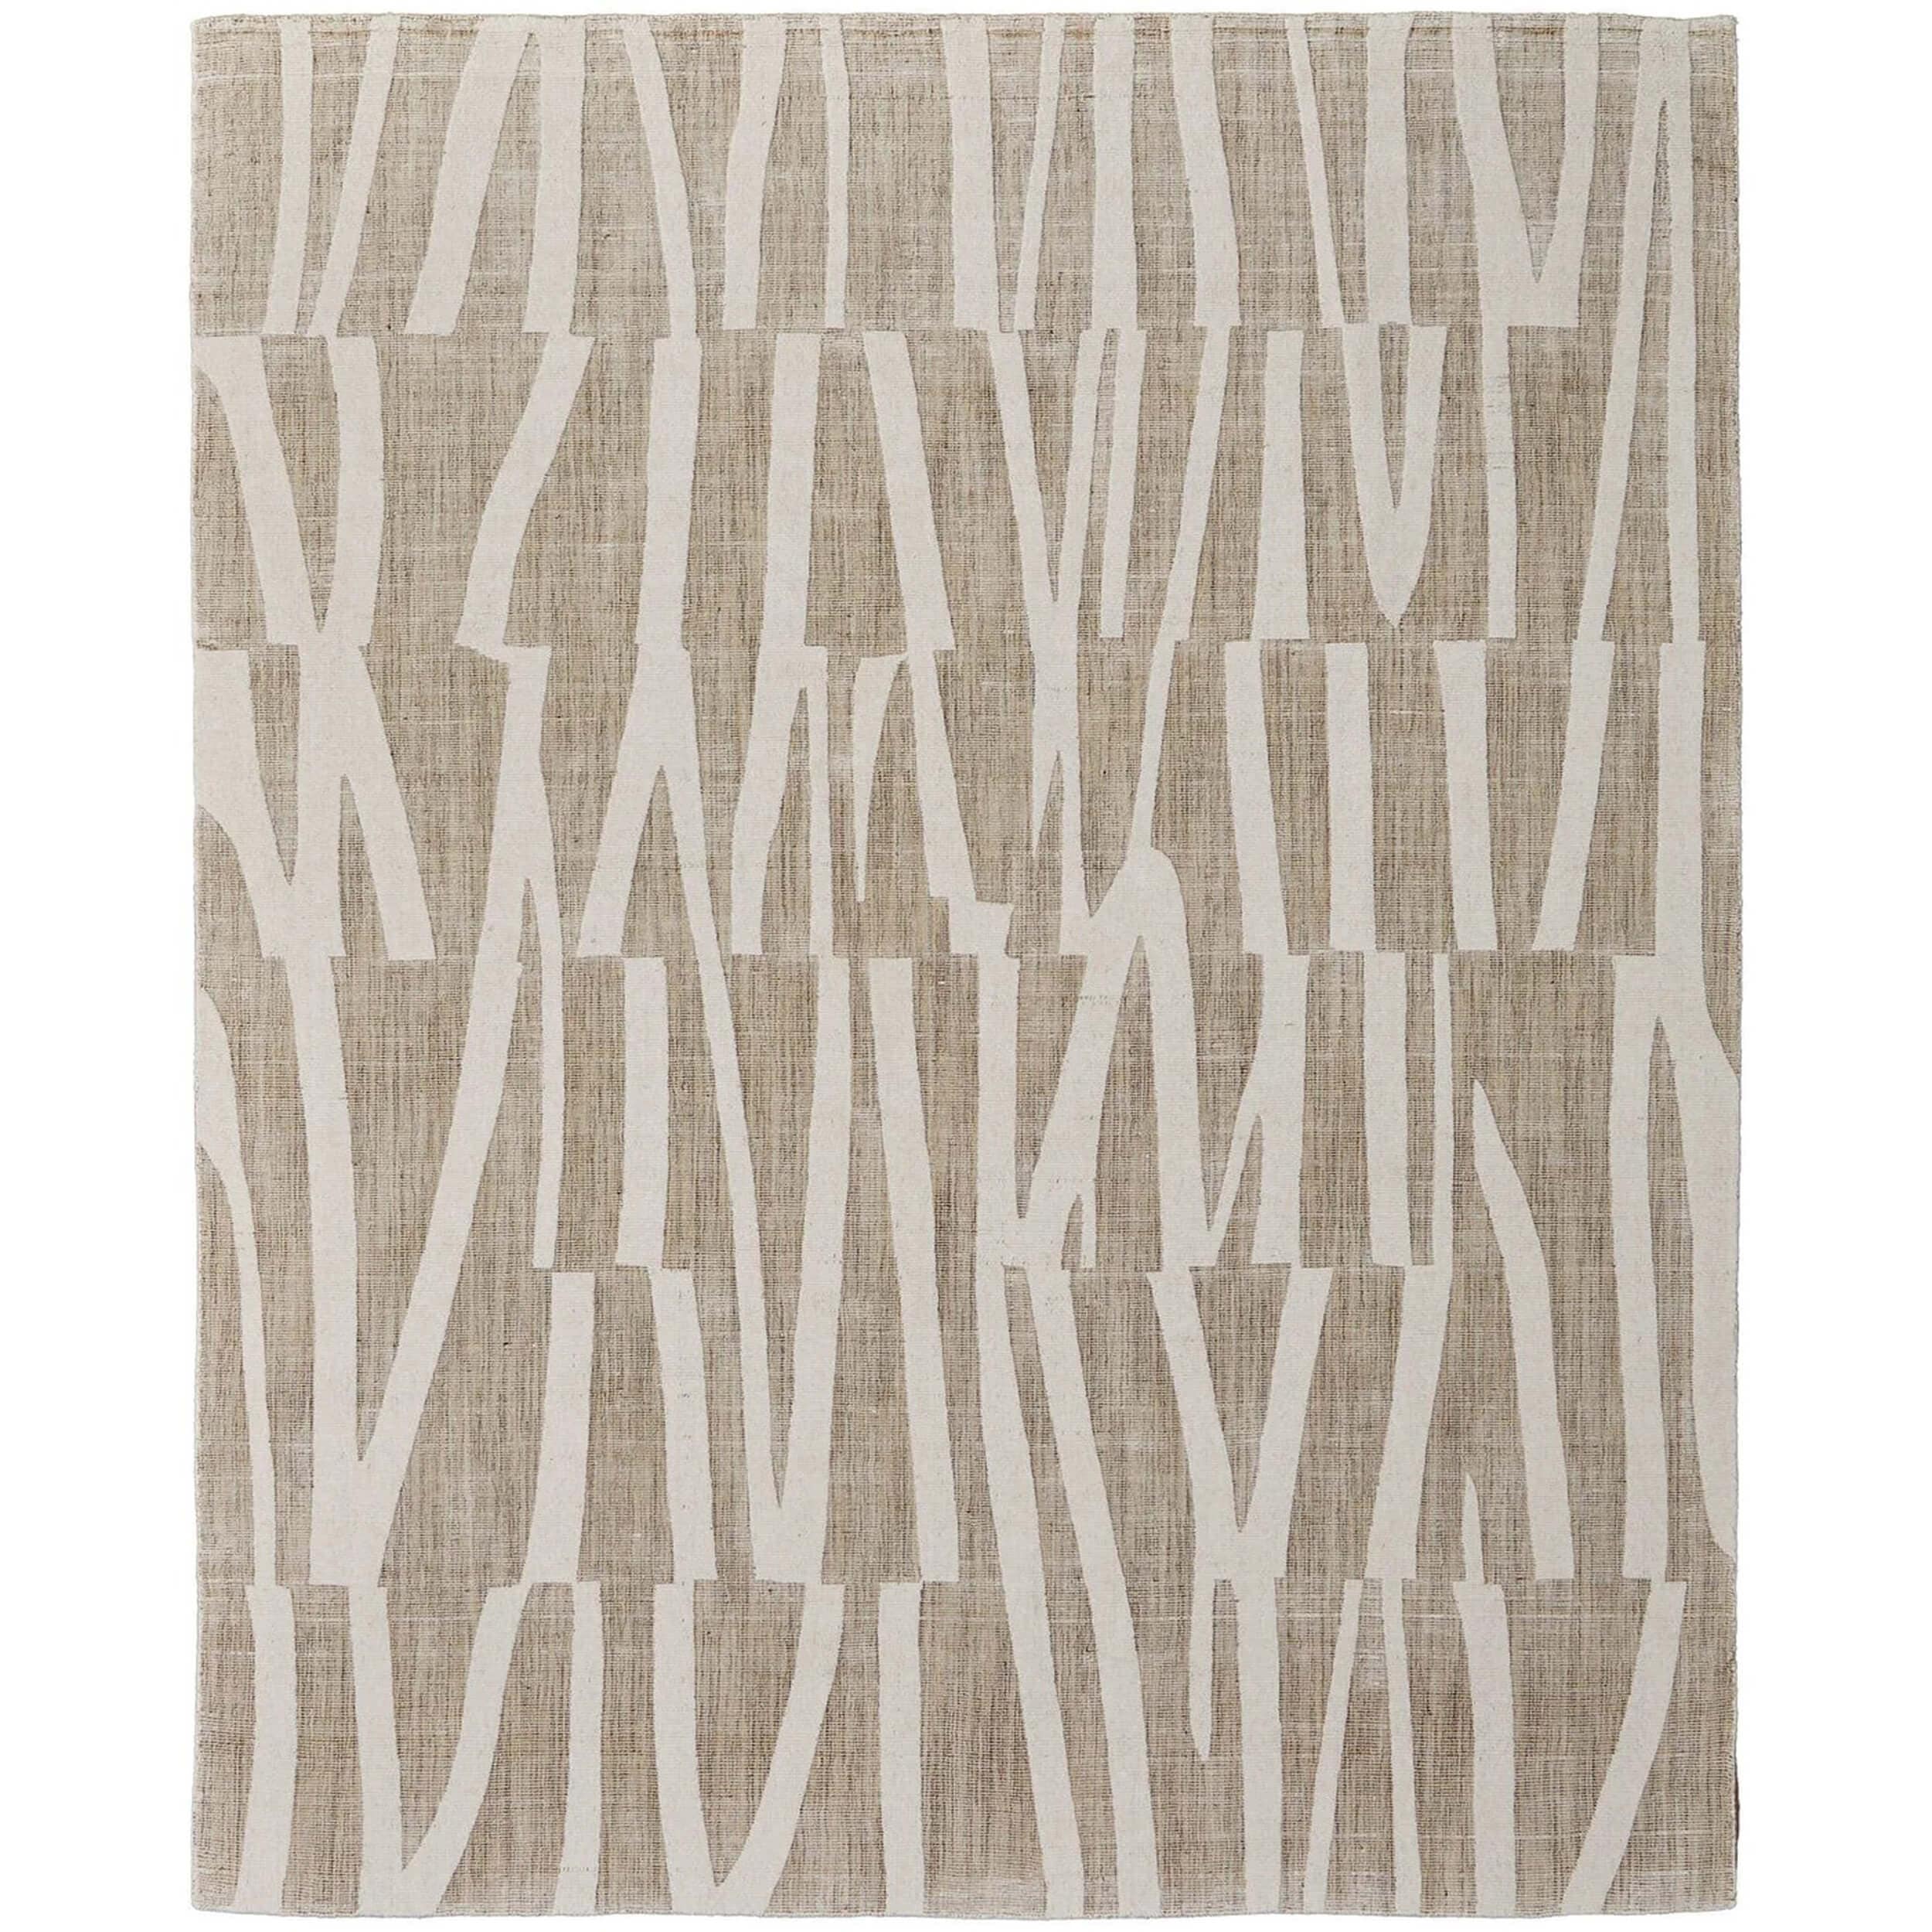 Image of Feizy Rug Peconic T8009, Linen